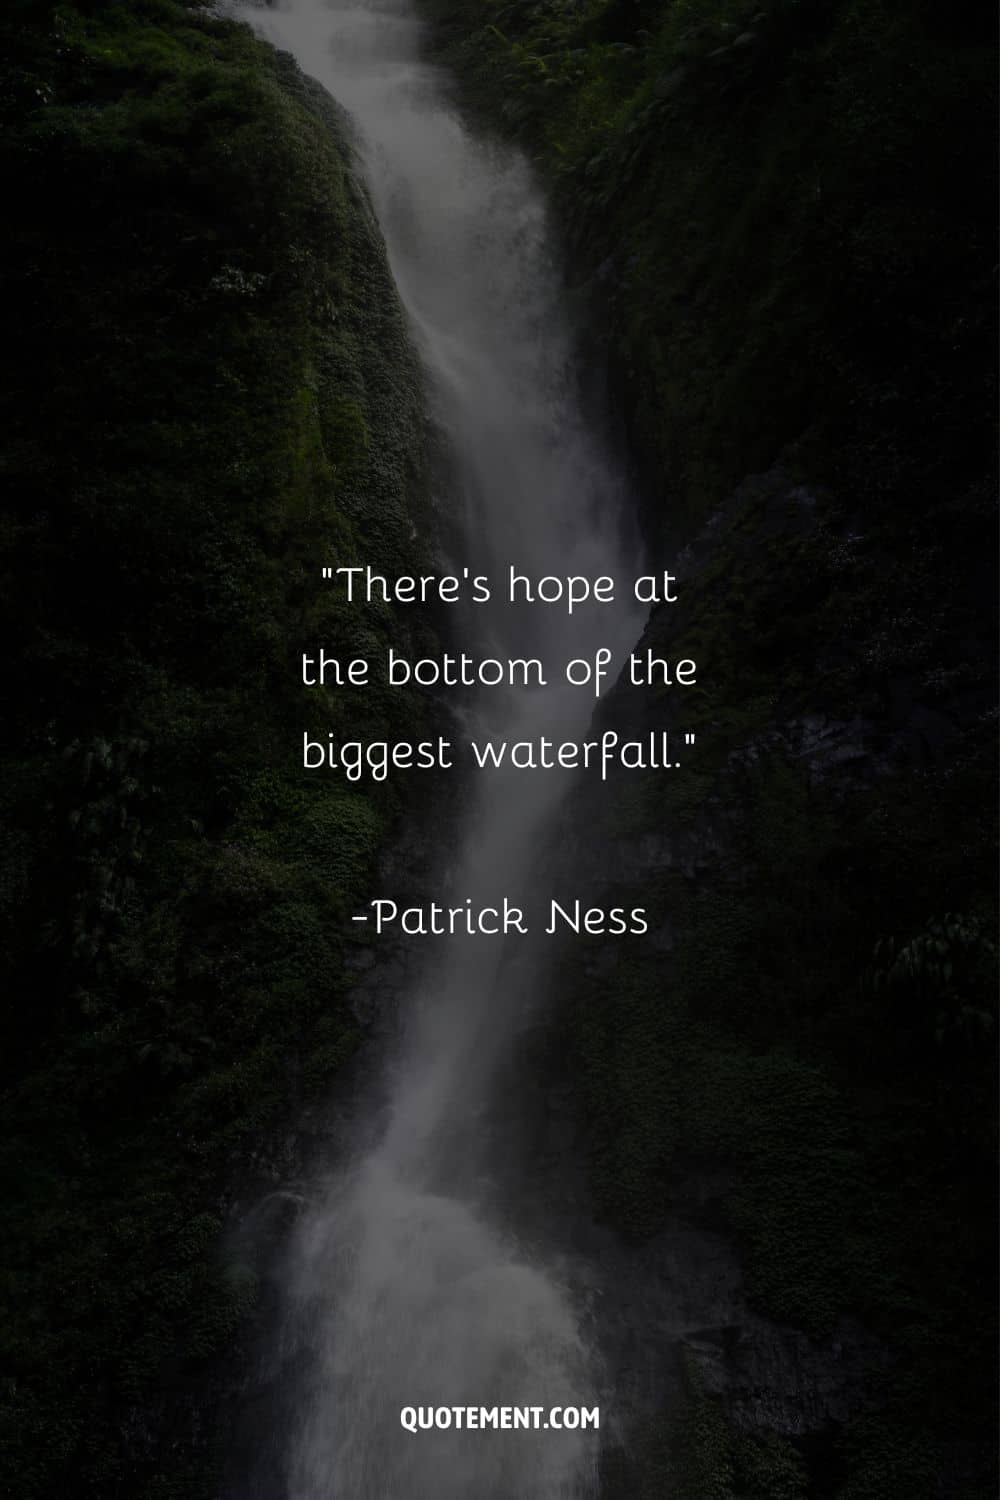 Powerful quote on hope by Patrick Ness and a waterfall in the background
